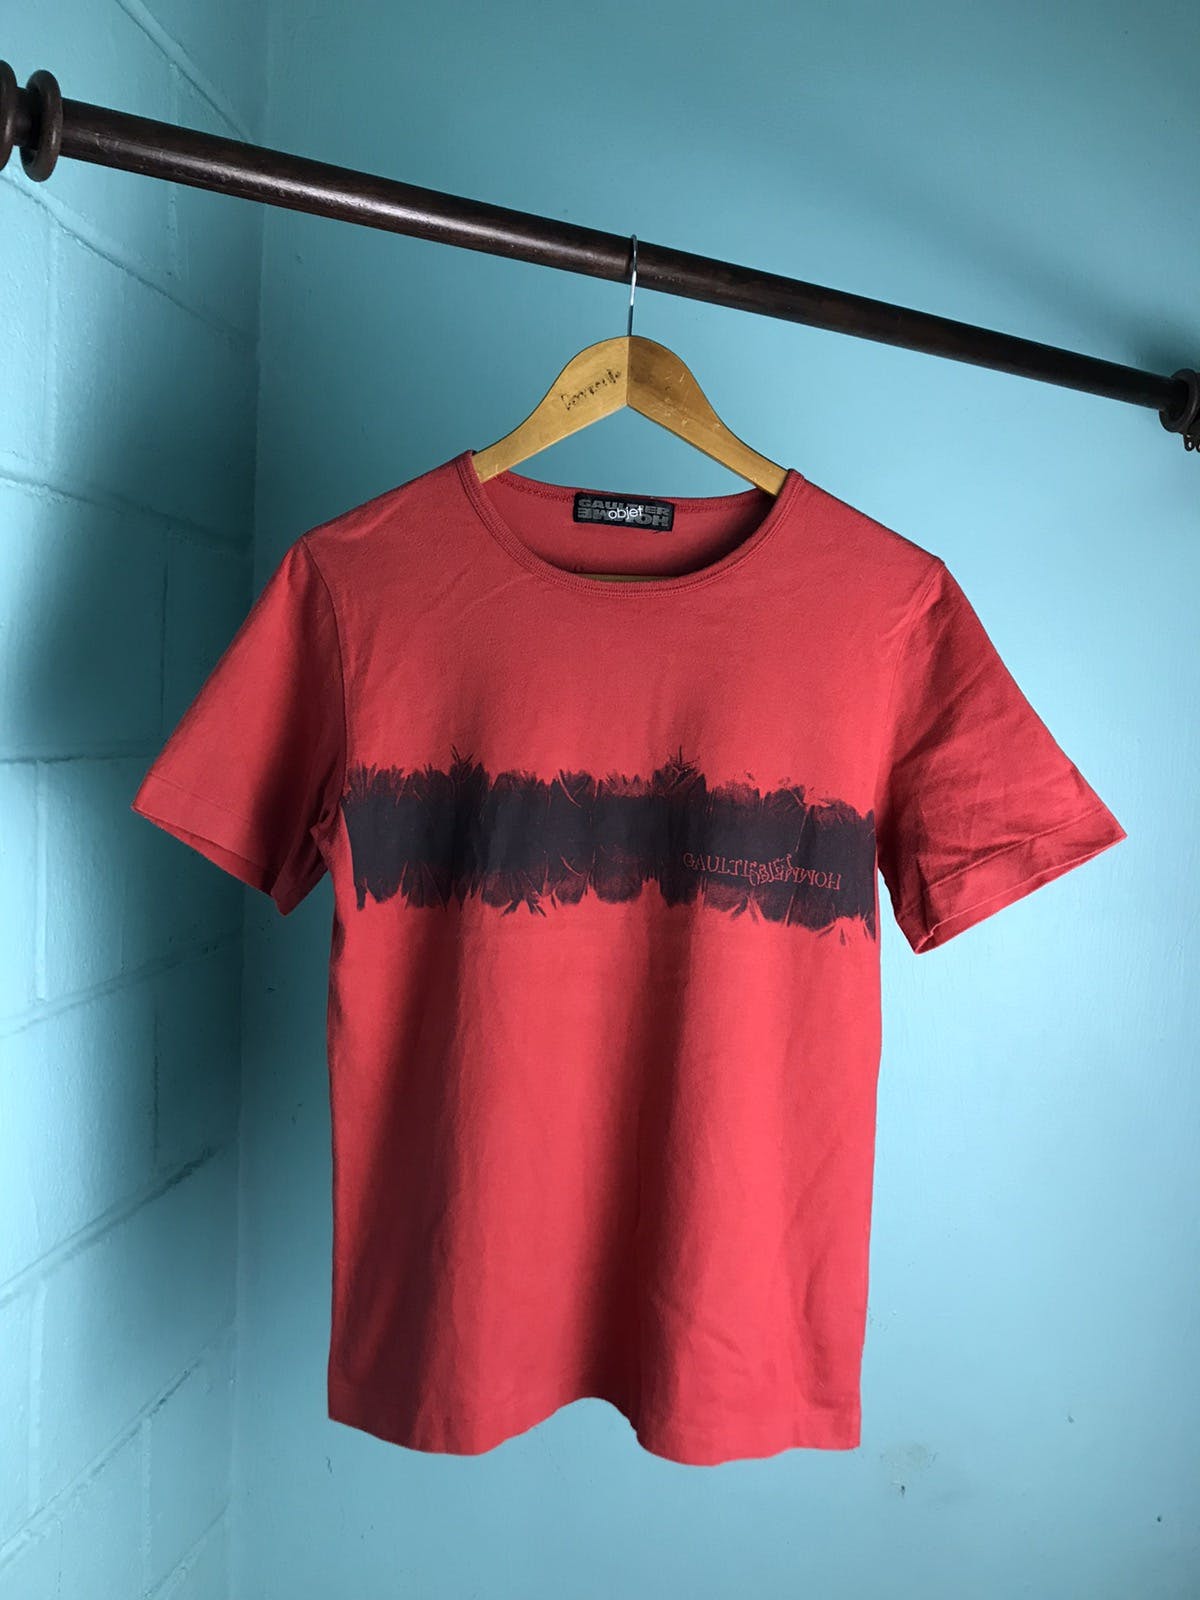 Vintage Gaultier Homme Object tee - 3